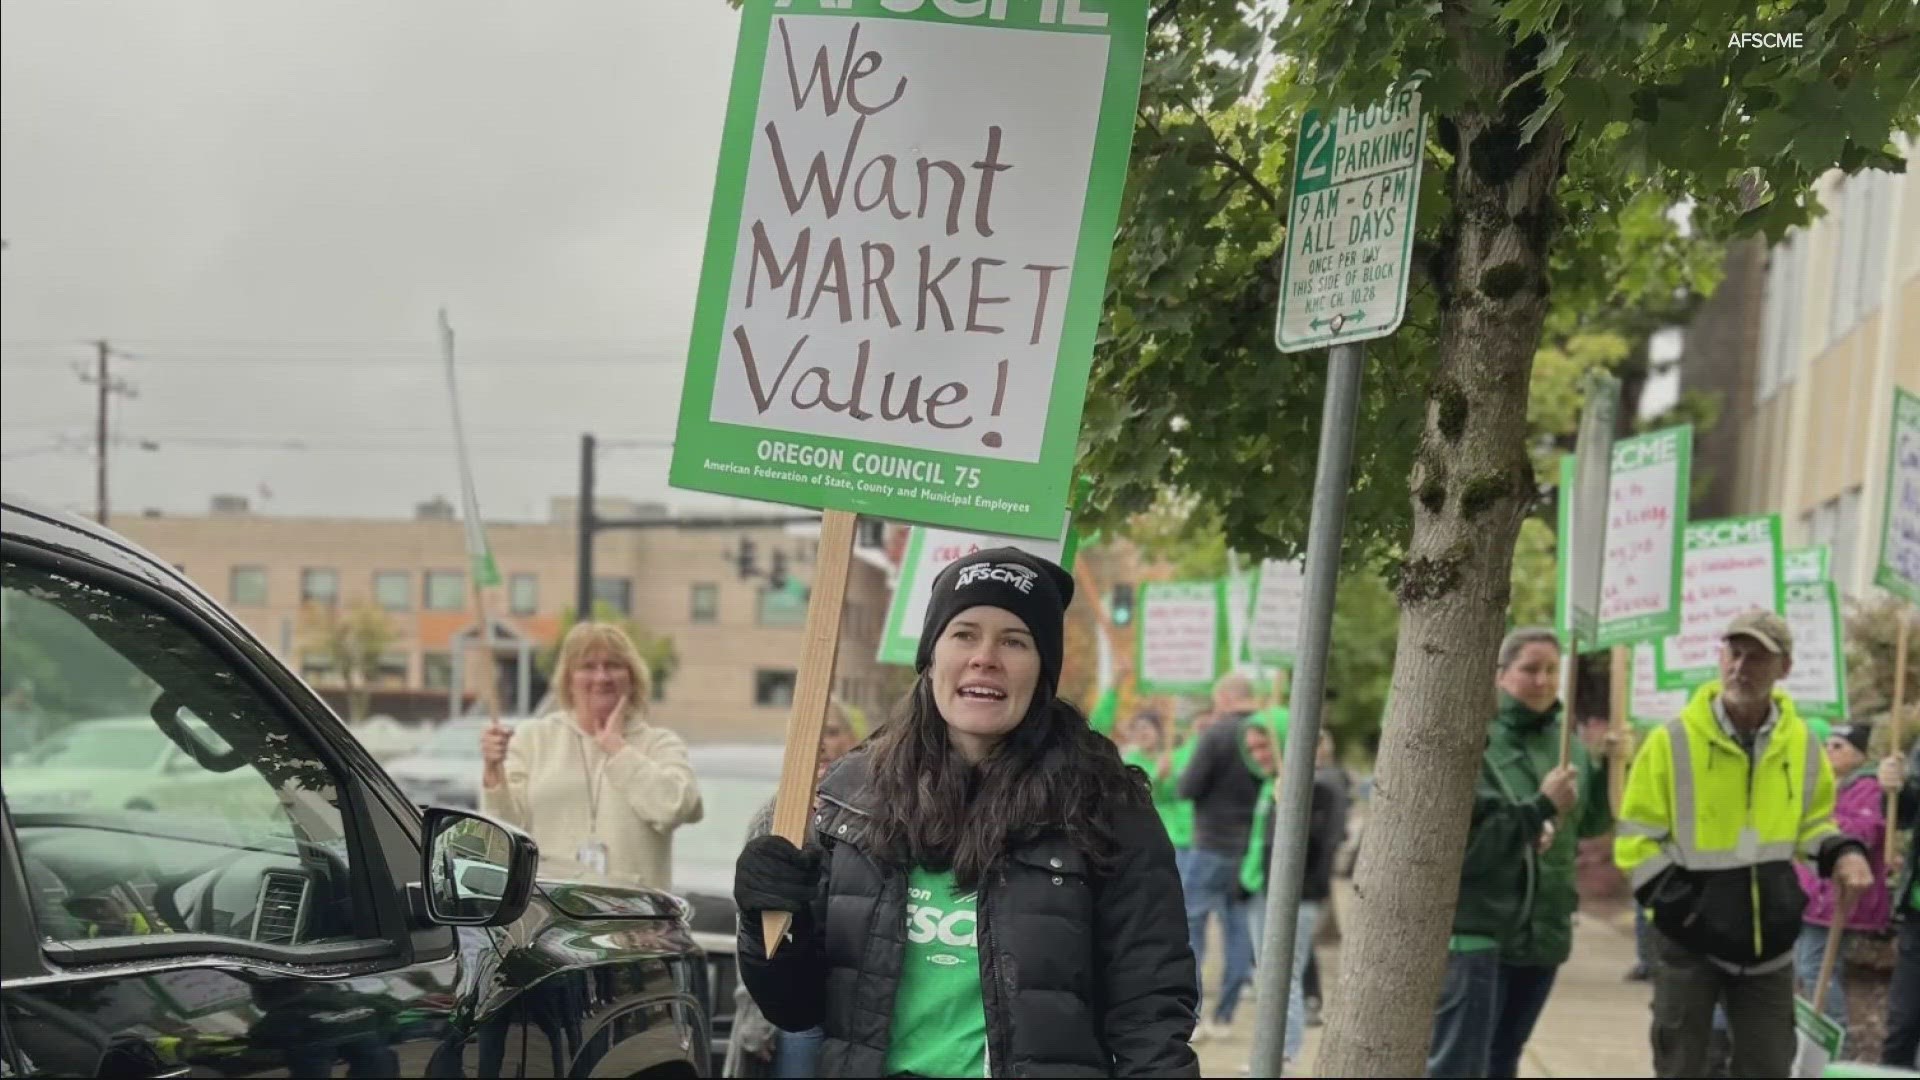 Yamhill County officials confirmed Tuesday night that it has reached a tentative agreement with the union representing employees, ending a strike.